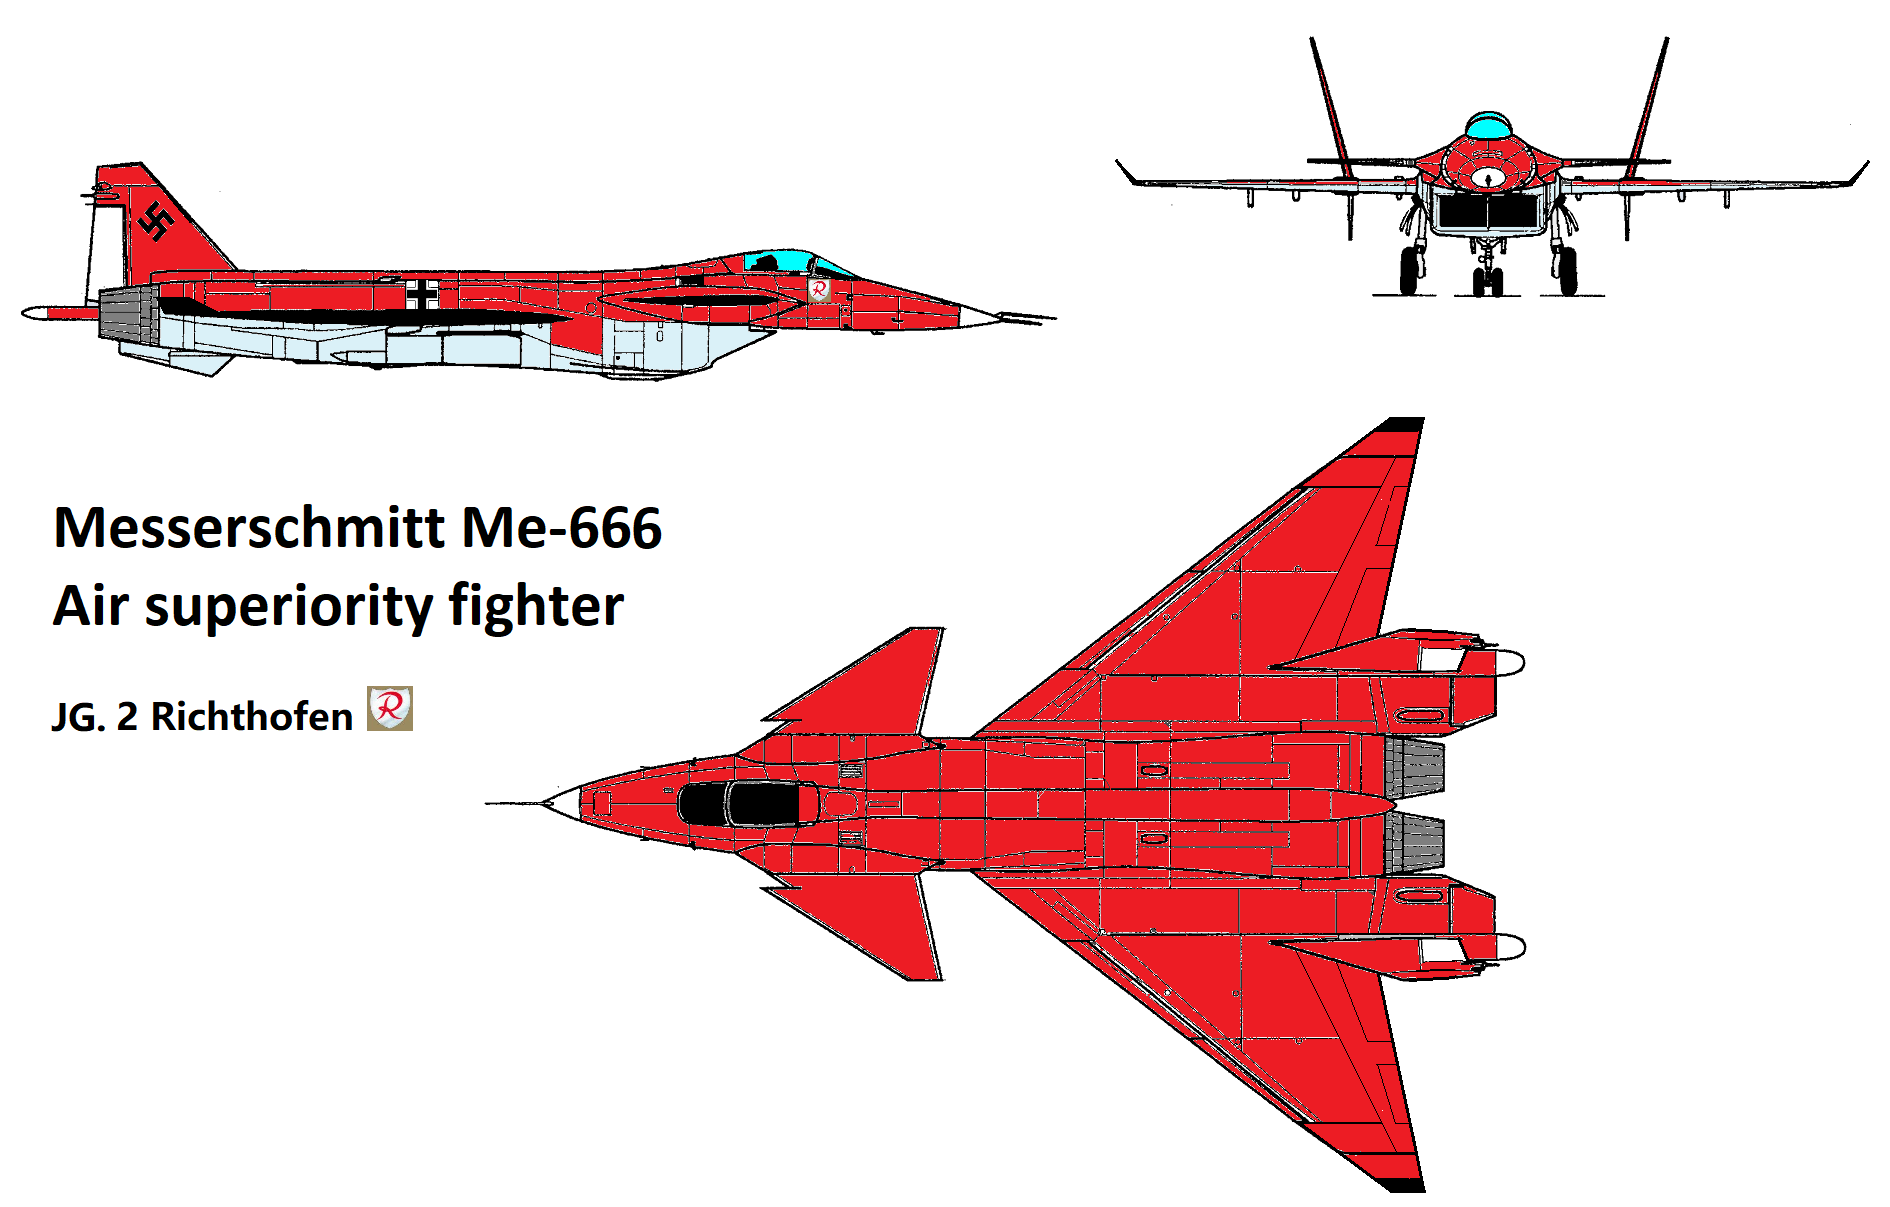 Me-666     Mig Project 1.44 -scl.88-.png